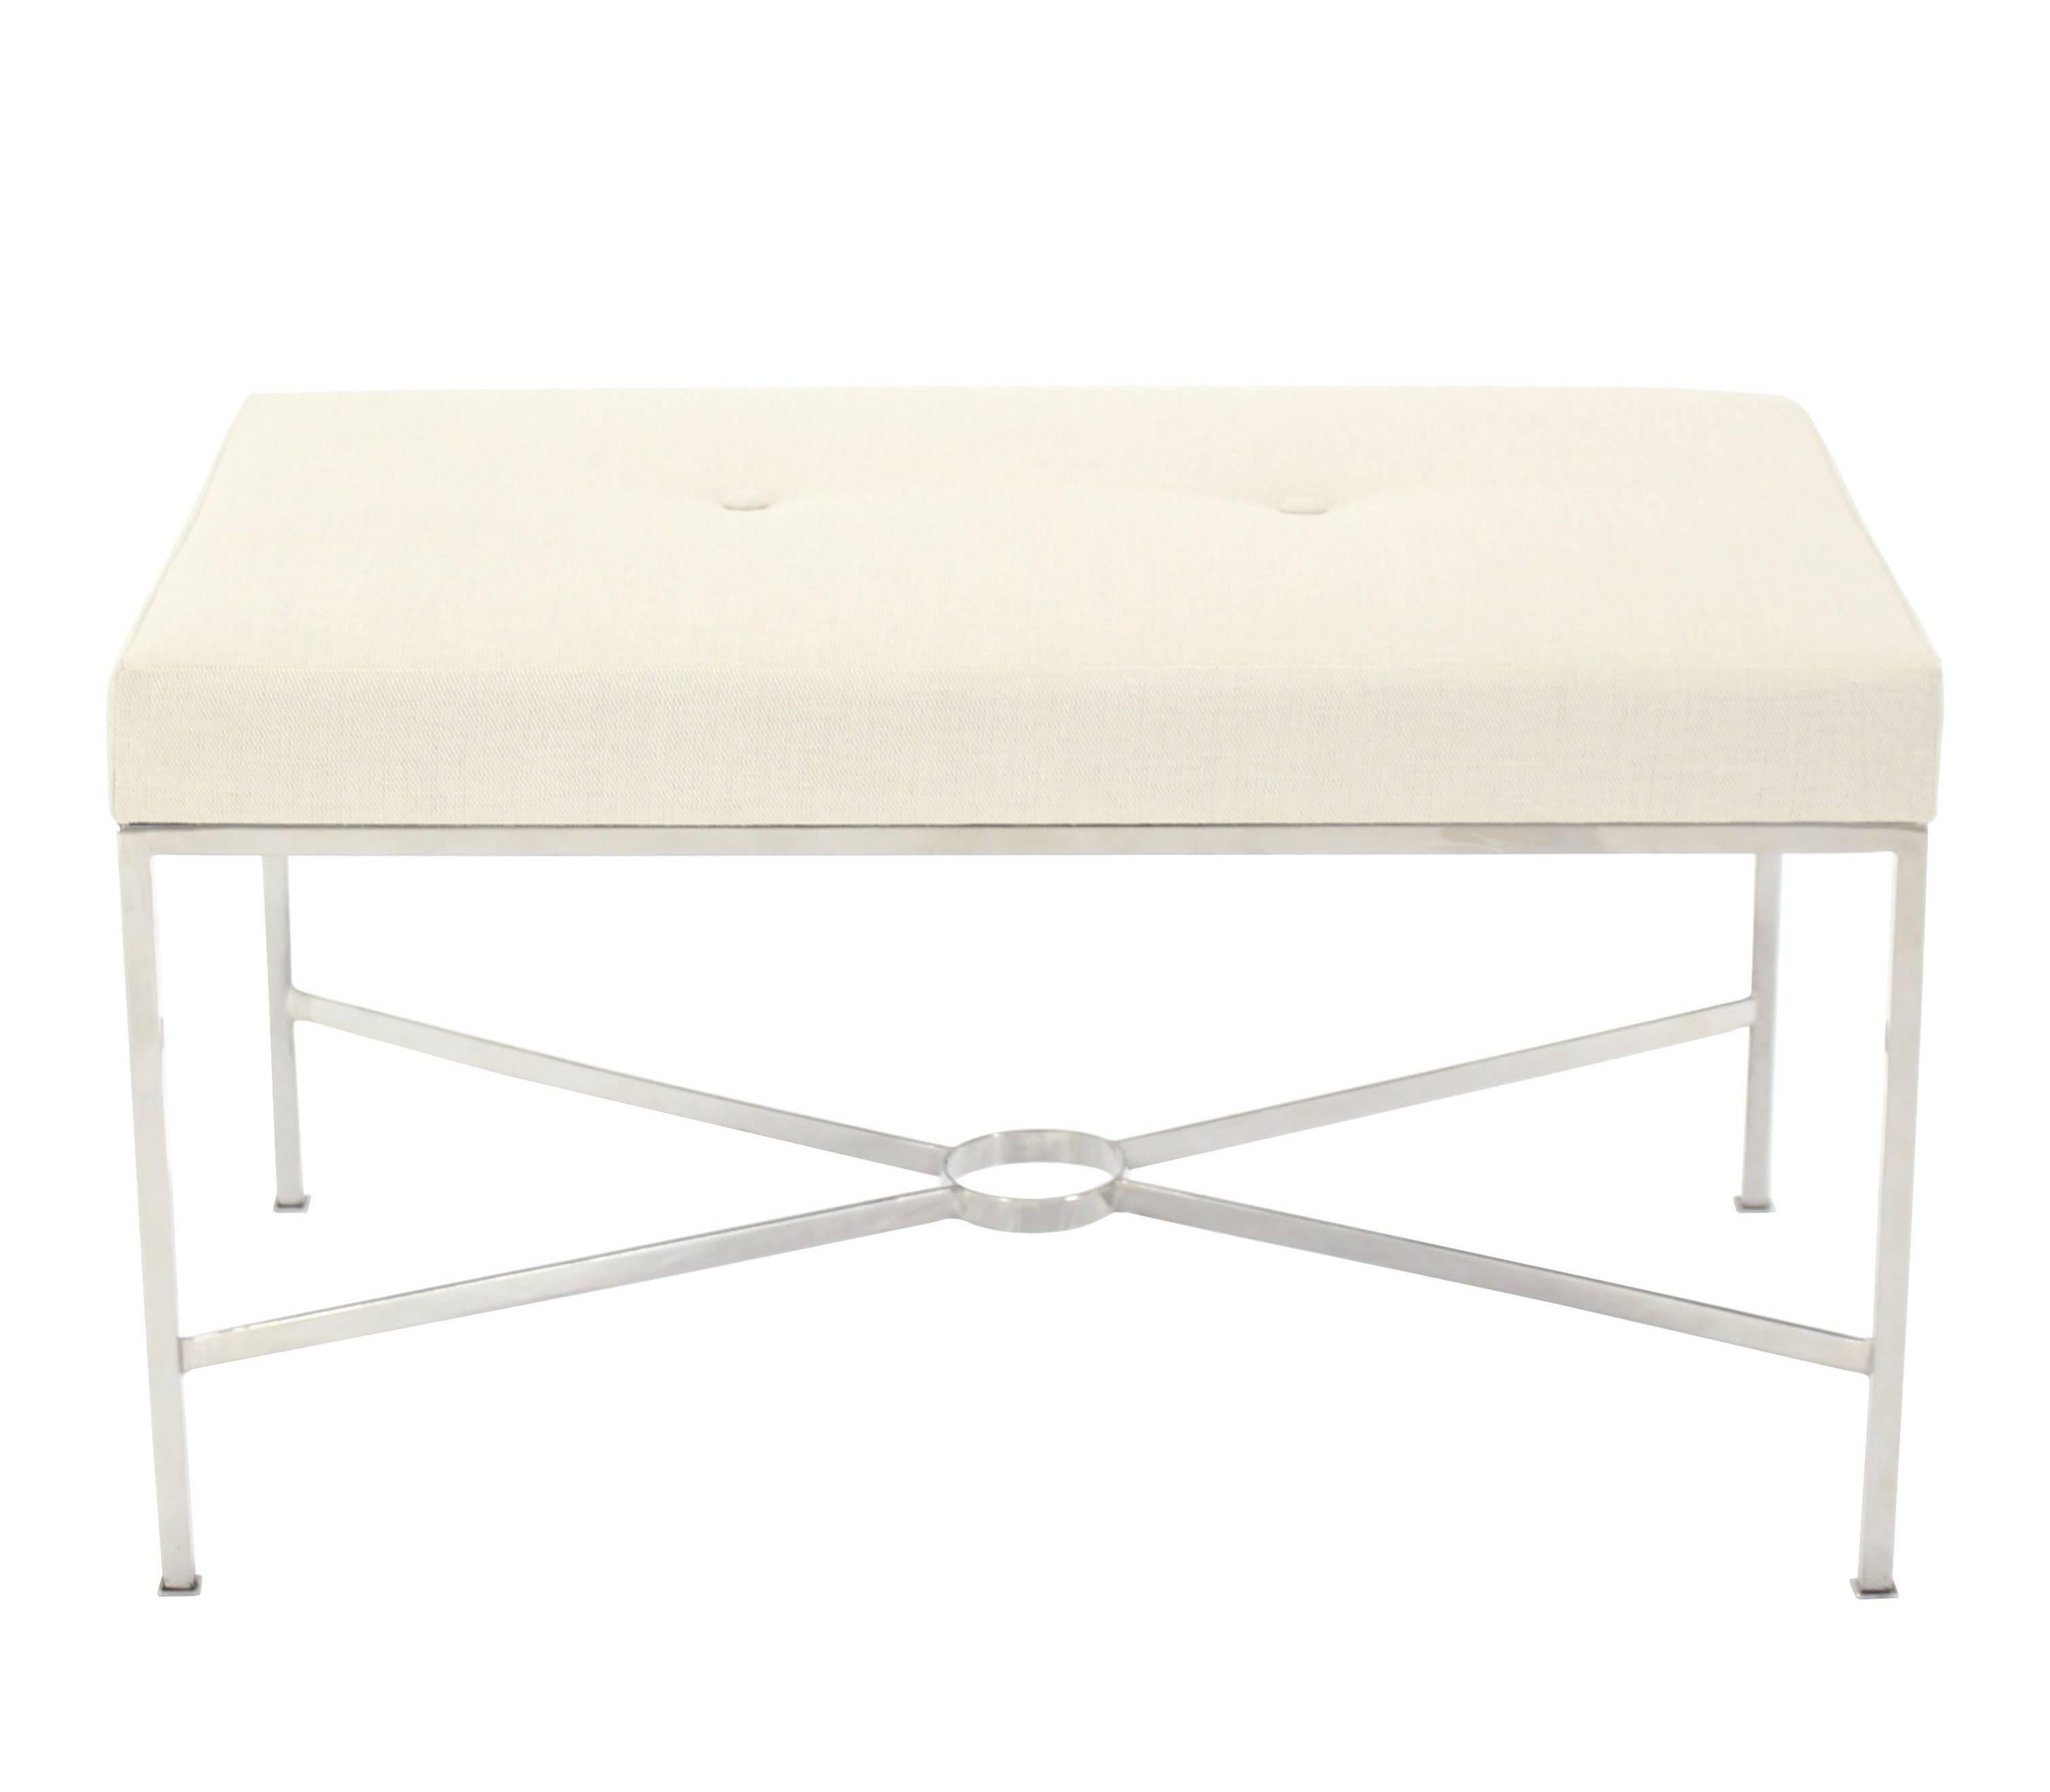 American Chrome X-Base Upholstered Top Bench For Sale